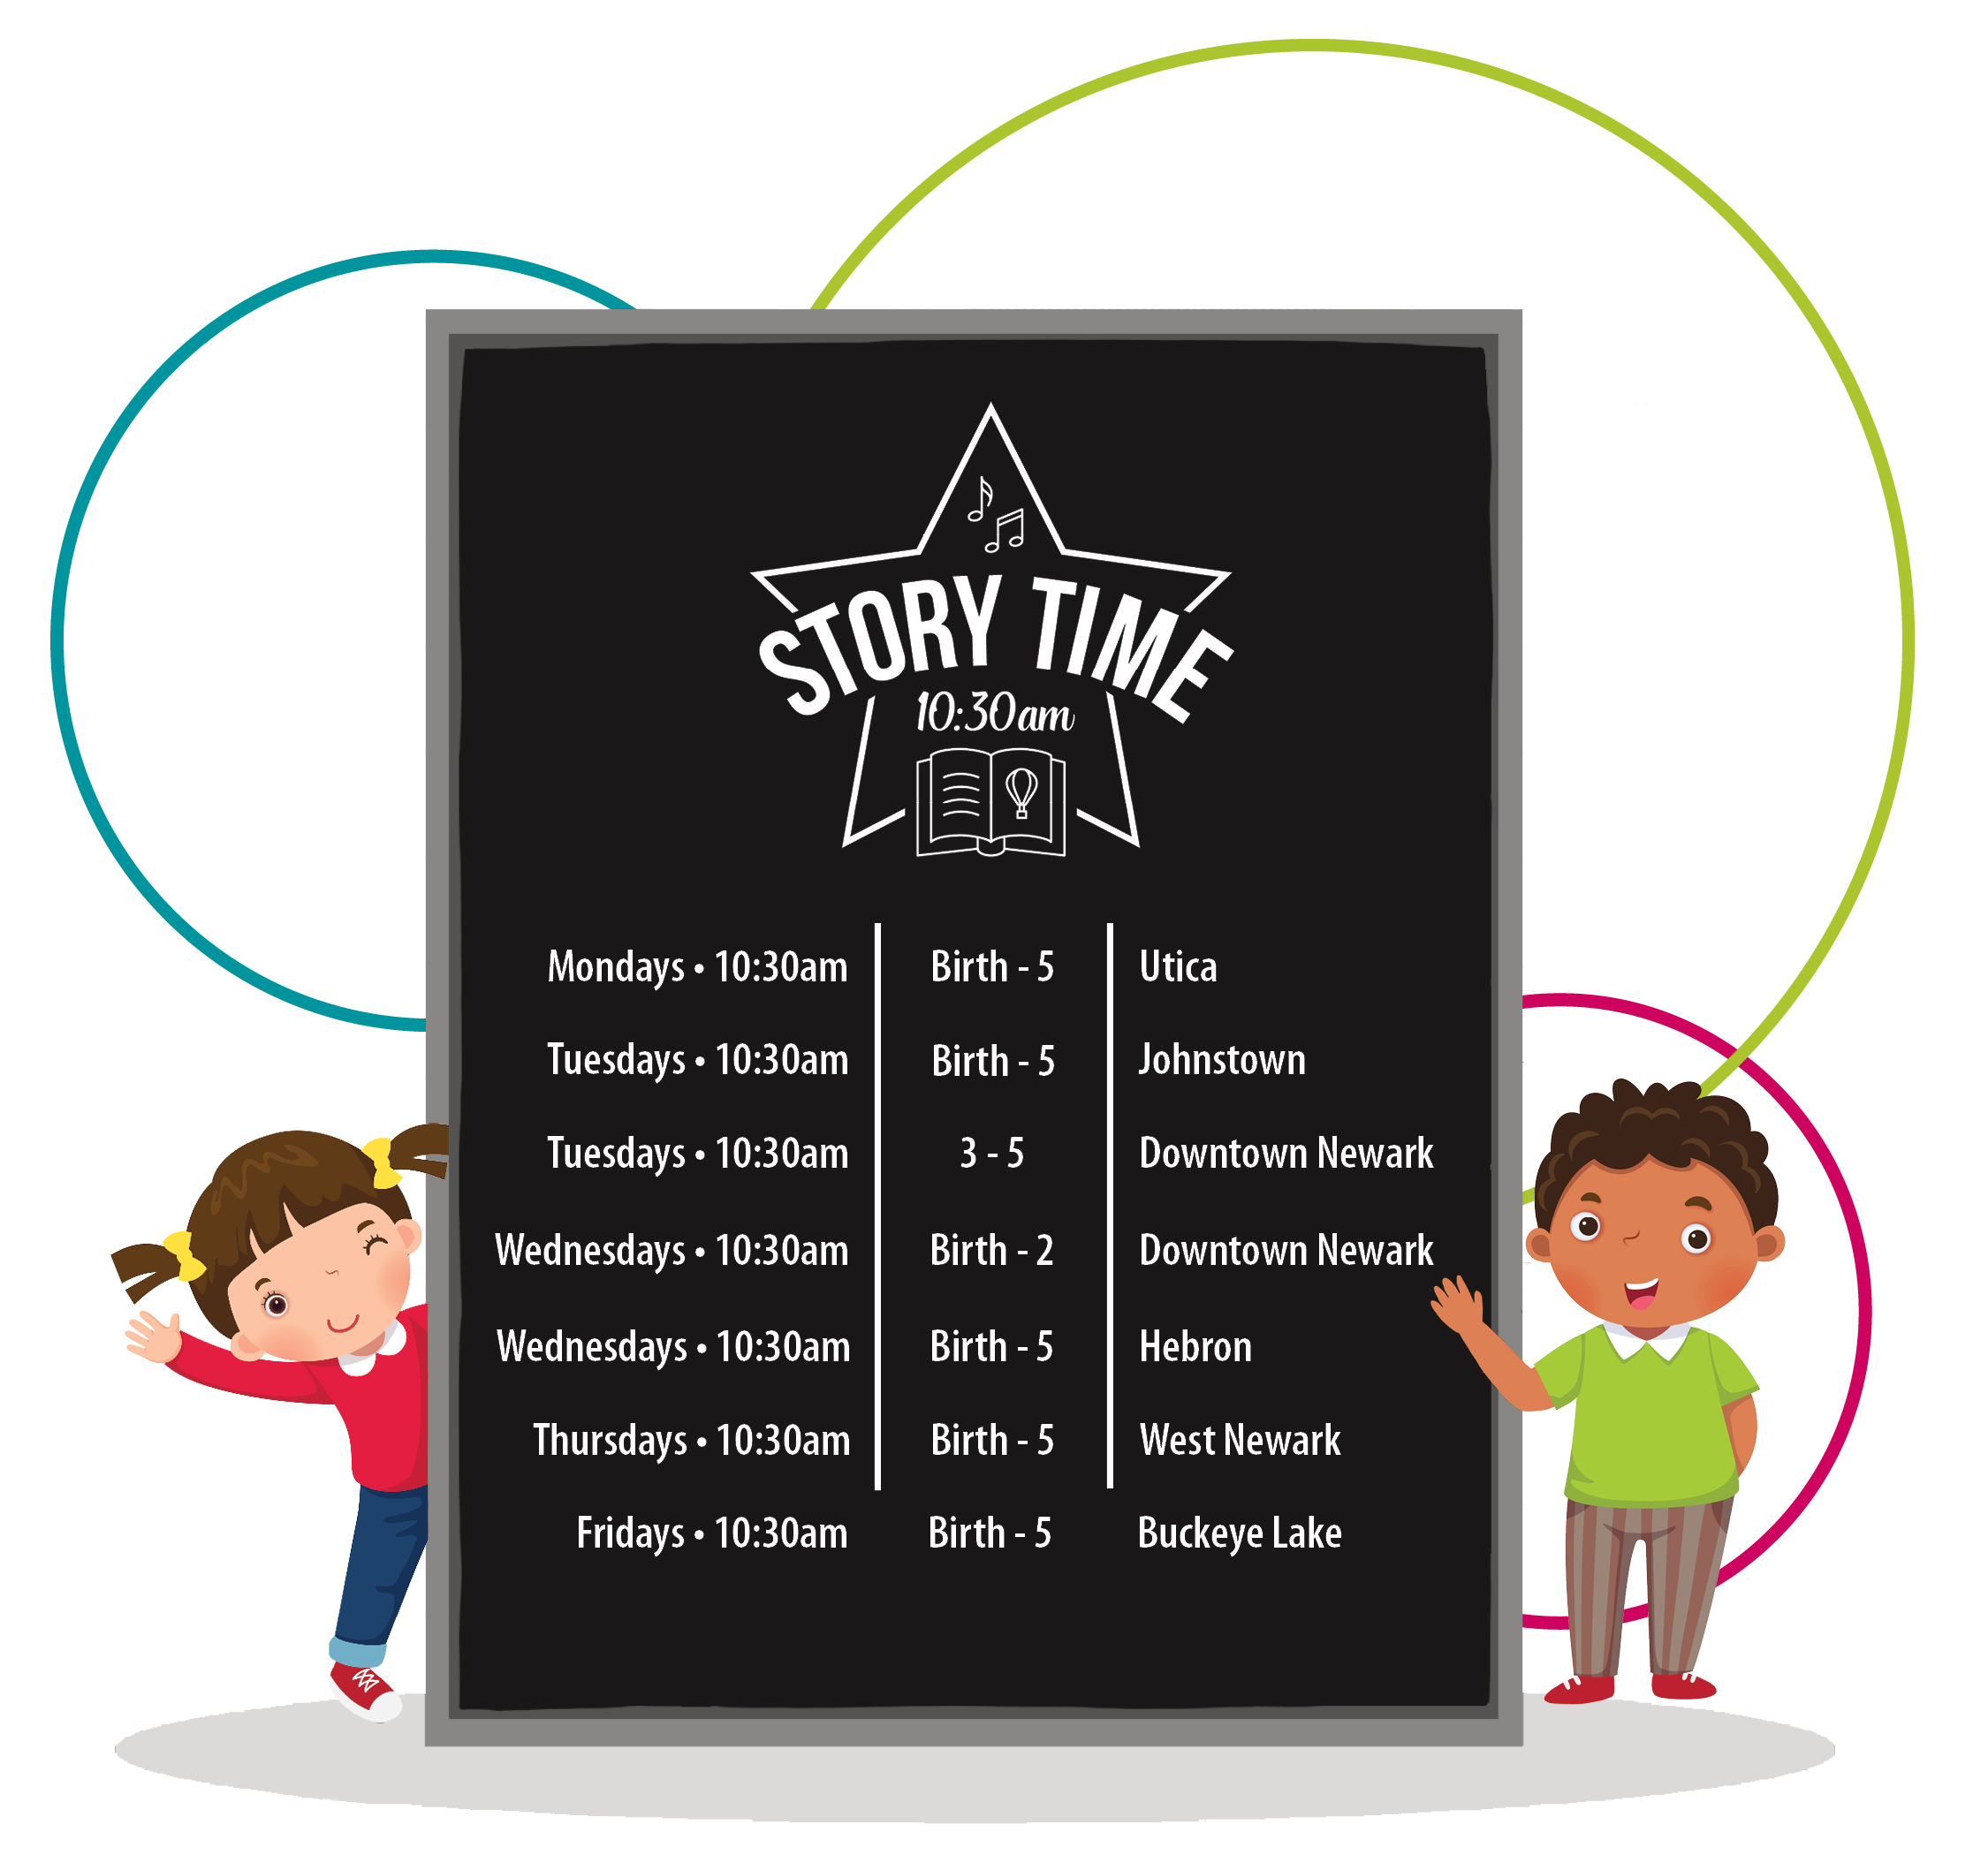 Story Time graphic